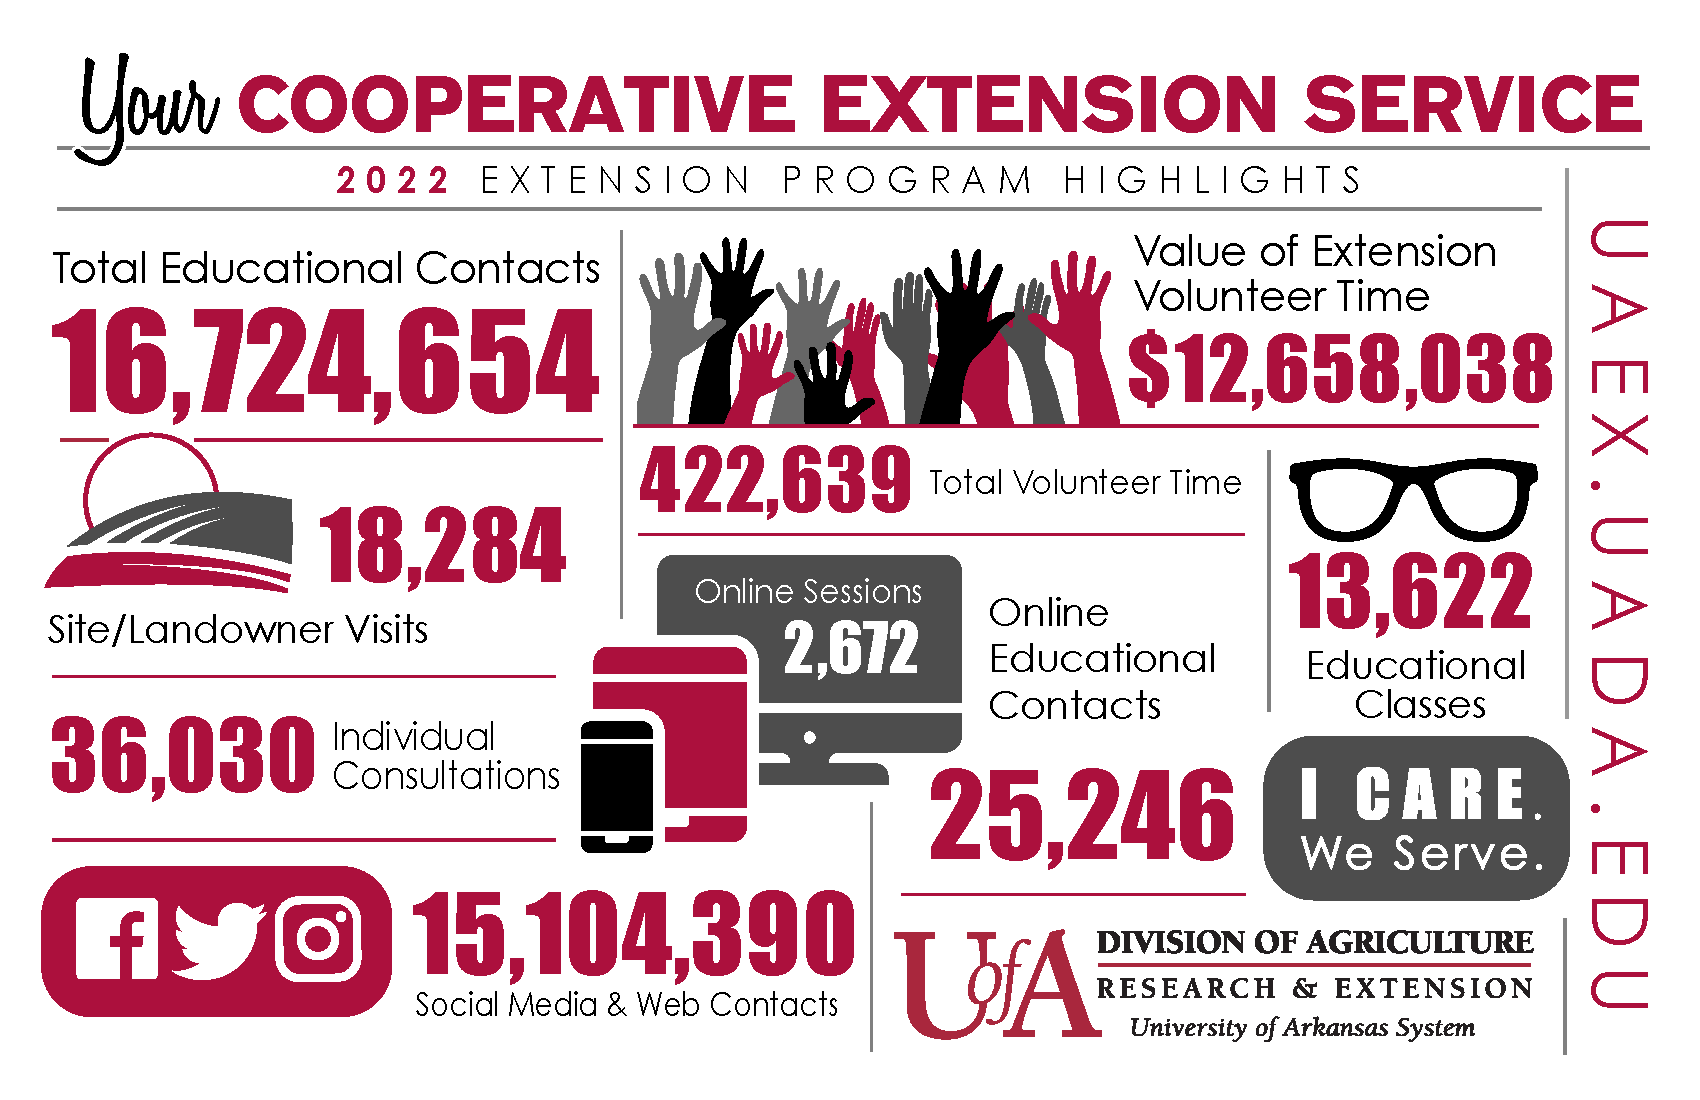 Extension 2022 impact infographic. total educational contacts 16,724,654. 18,284 landowner visits. 36,030 individual consultations. 15,104,390 social media and web contacts. 25,246 online educational contacts. 